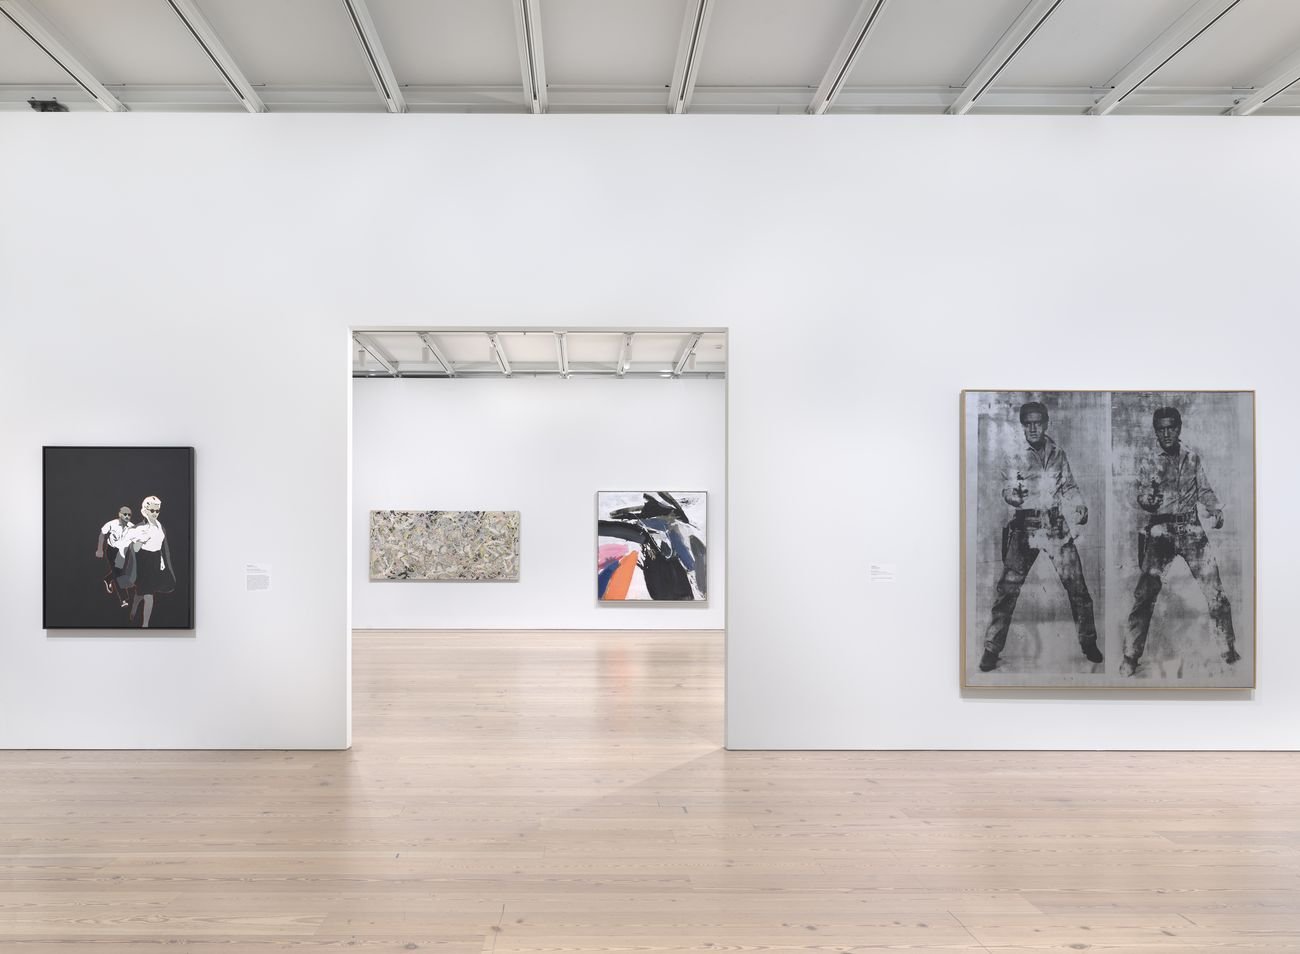 The Whitney’s Collection. Selections from 1900 to 1965. Installation view at Whitney Museum of American Art, New York 2019. Photo Ron Amstutz